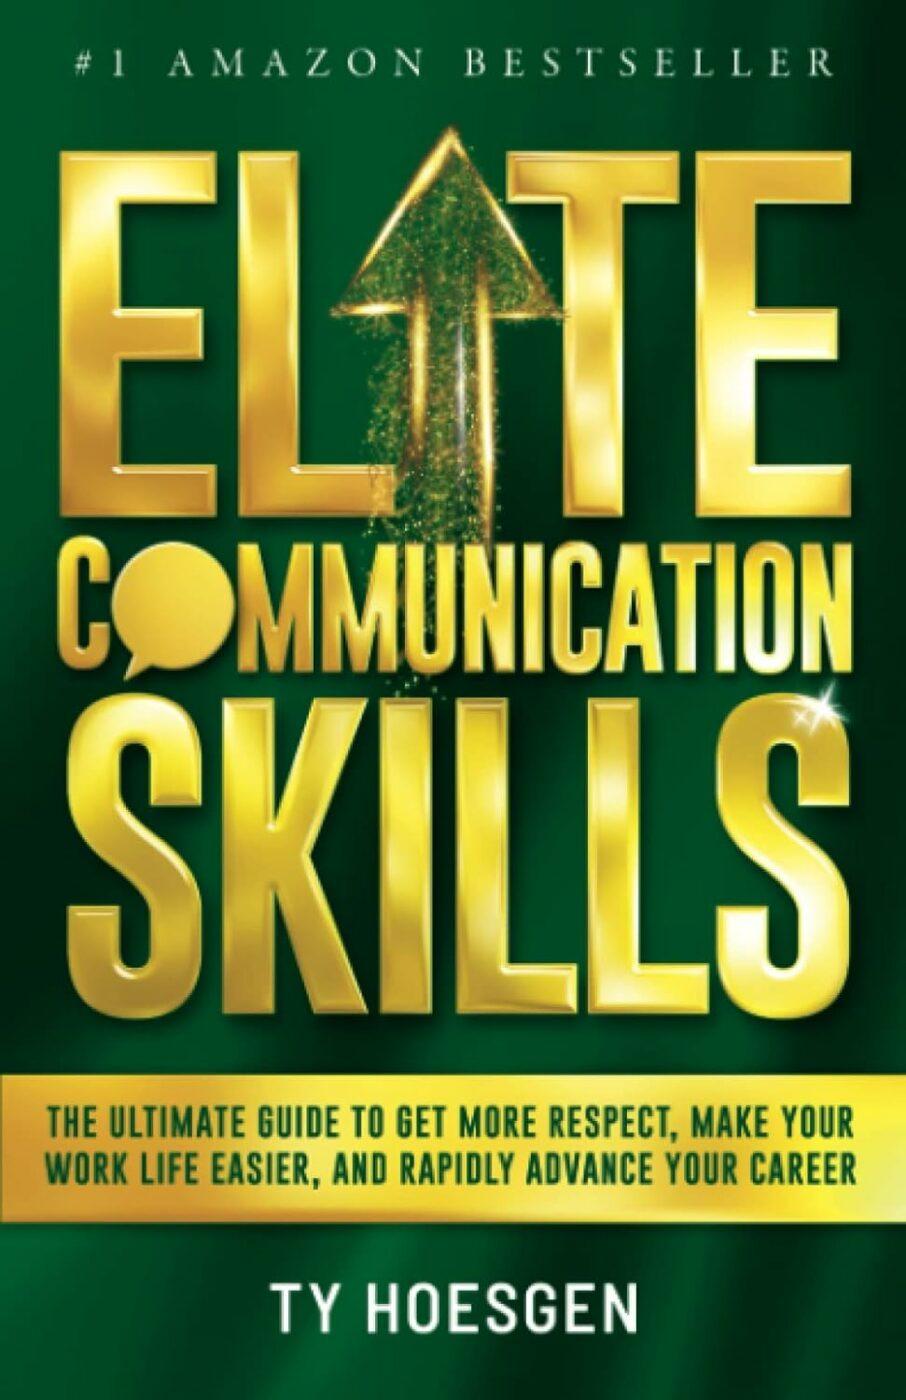 Elite Communication Skills for Young Professionals by Ty Hoesgen is one of Amazon's most popular communication skills books